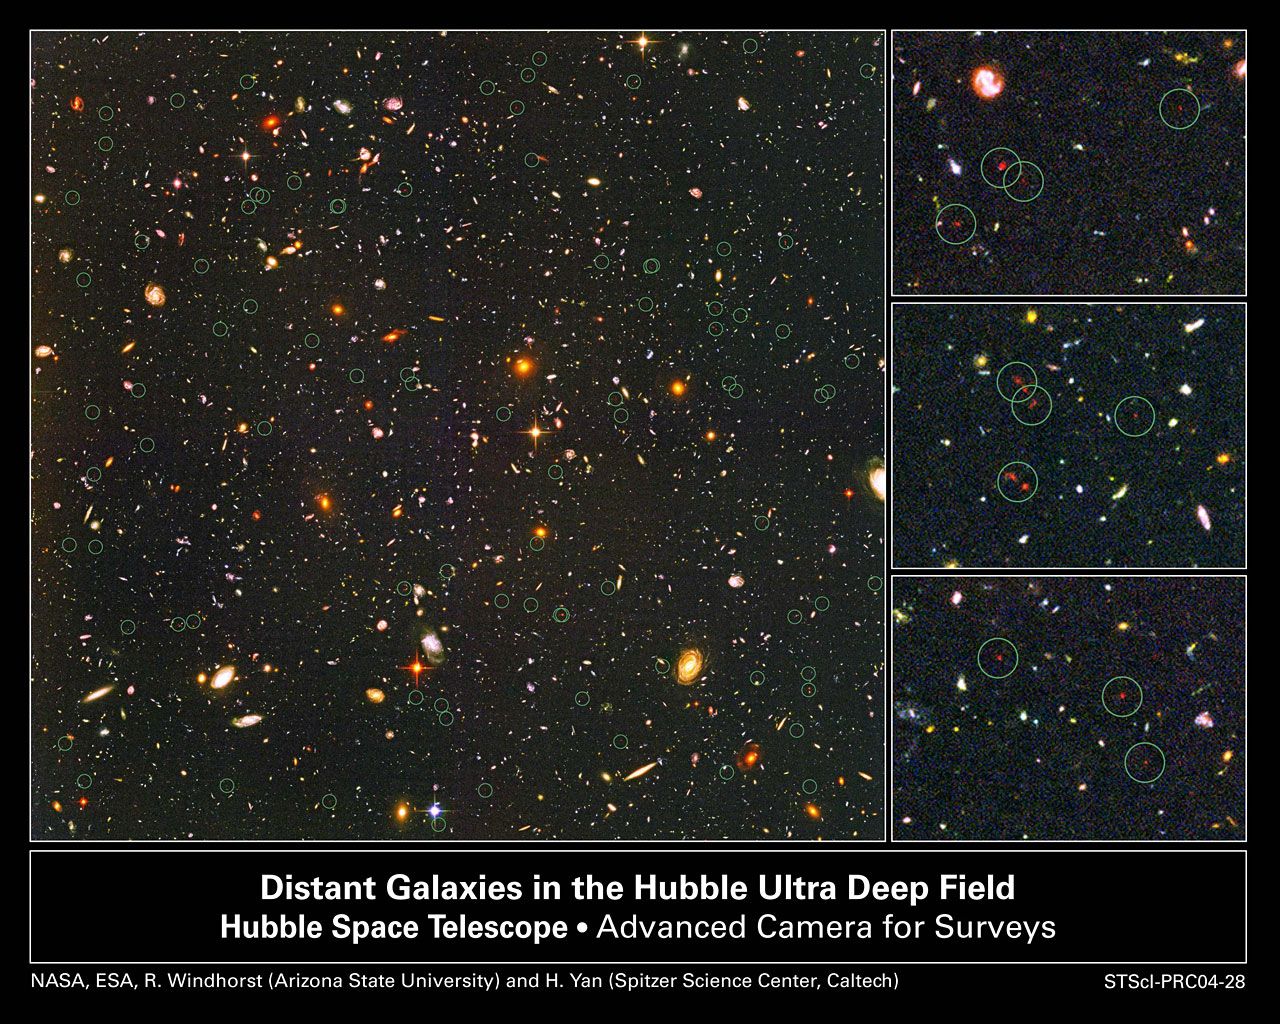 Hubble Ultra Deep Field Wallpaper - Pics about space